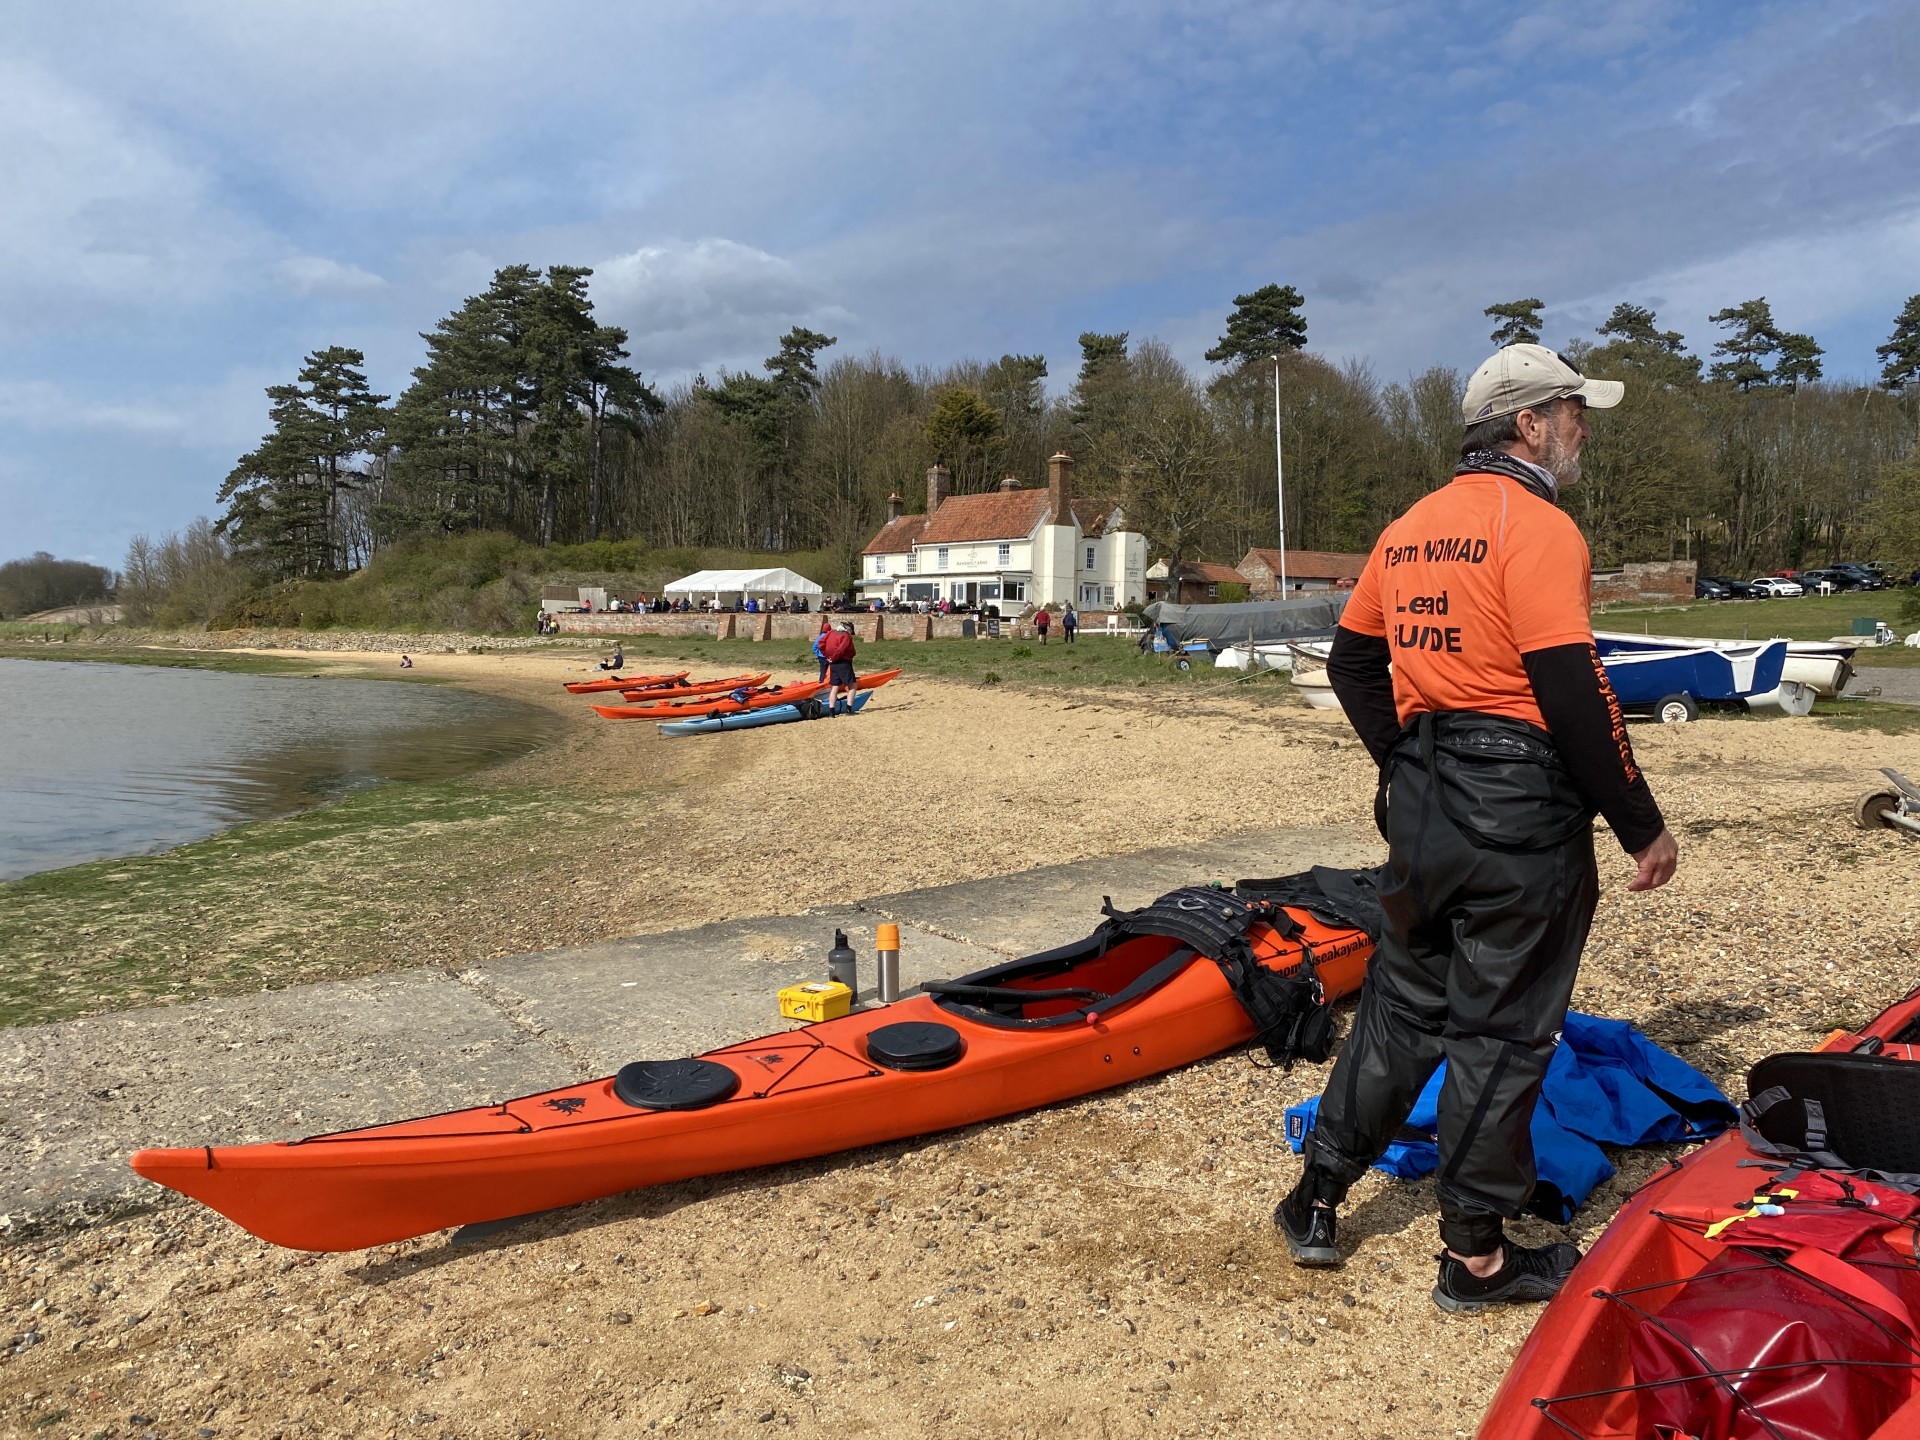 A Guide next to his orange sea kayak on the beach from the Ramsholt arms pub.